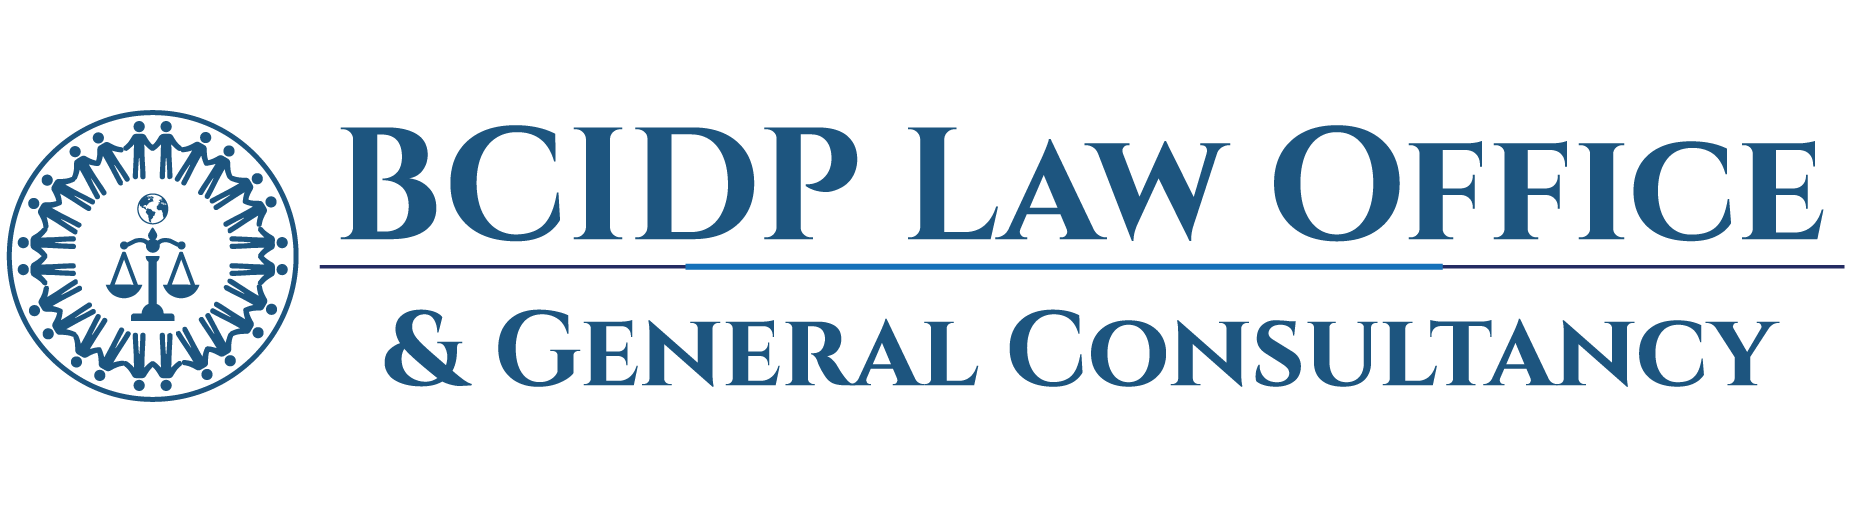 BCIDP Law Office & General Consultancy